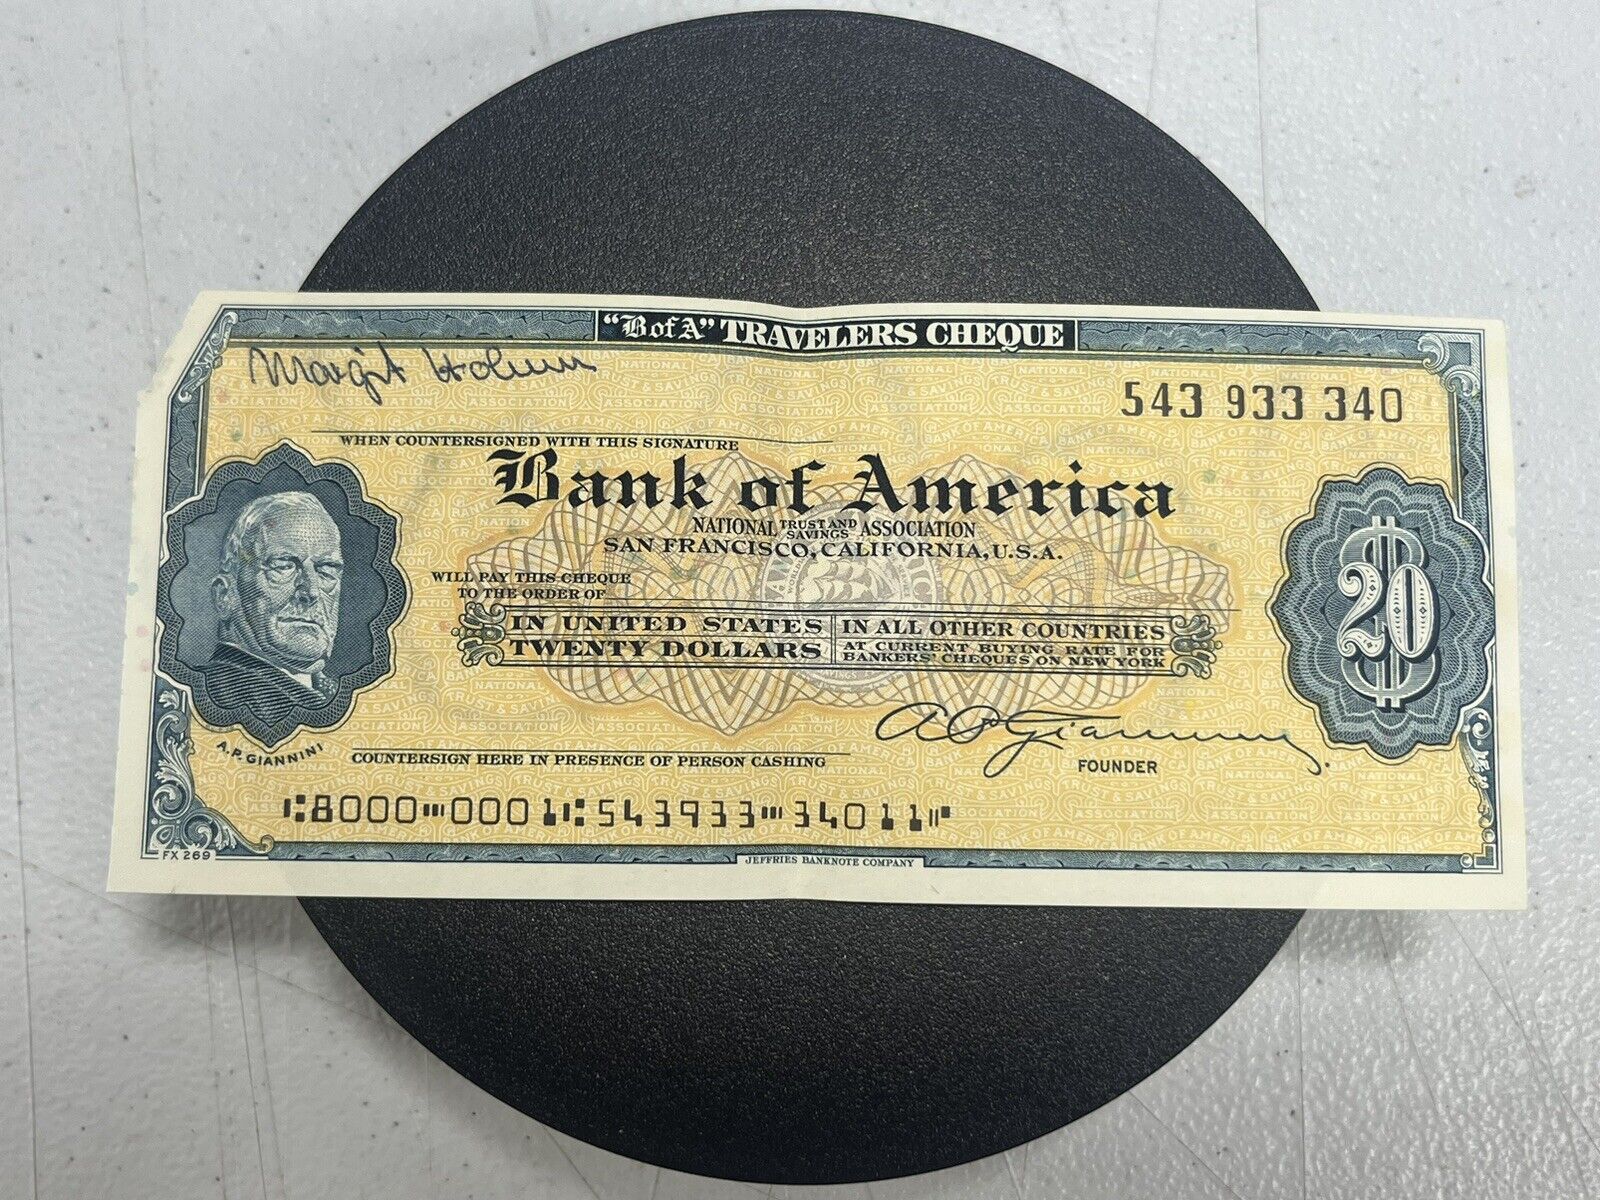 Vintage Bank of America Travelers Cheque $20 Check